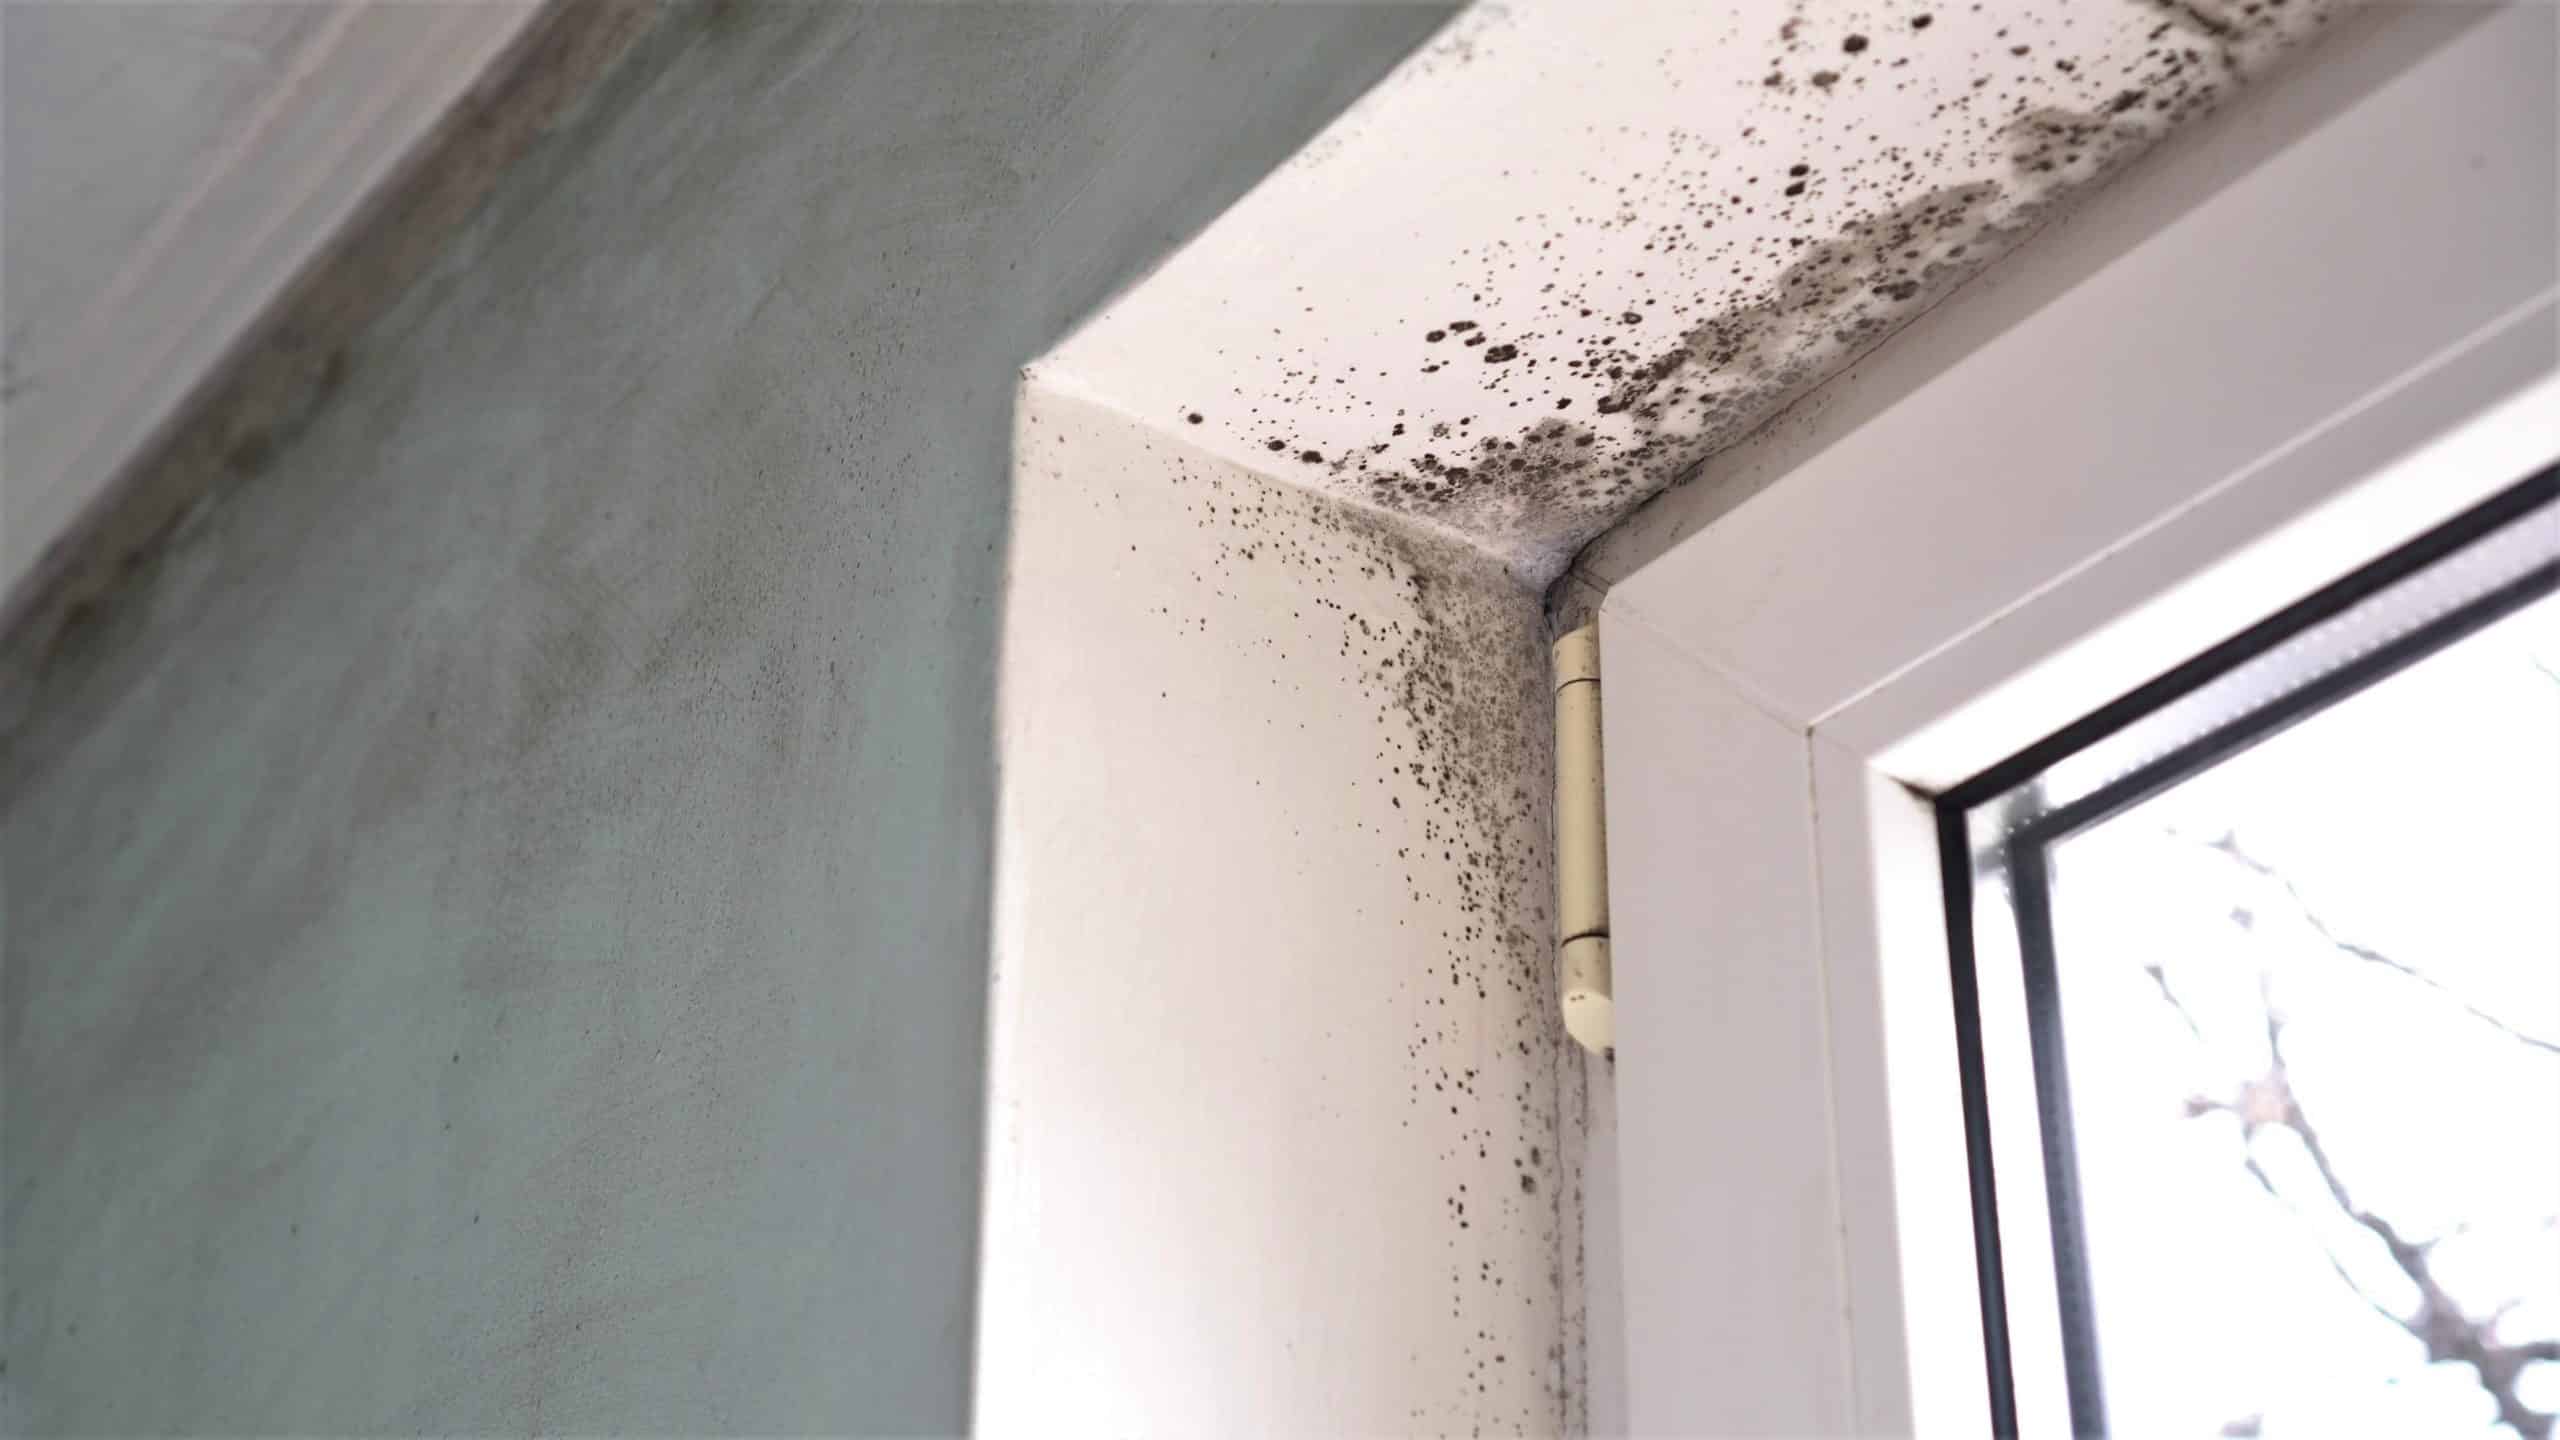 How to spot mold